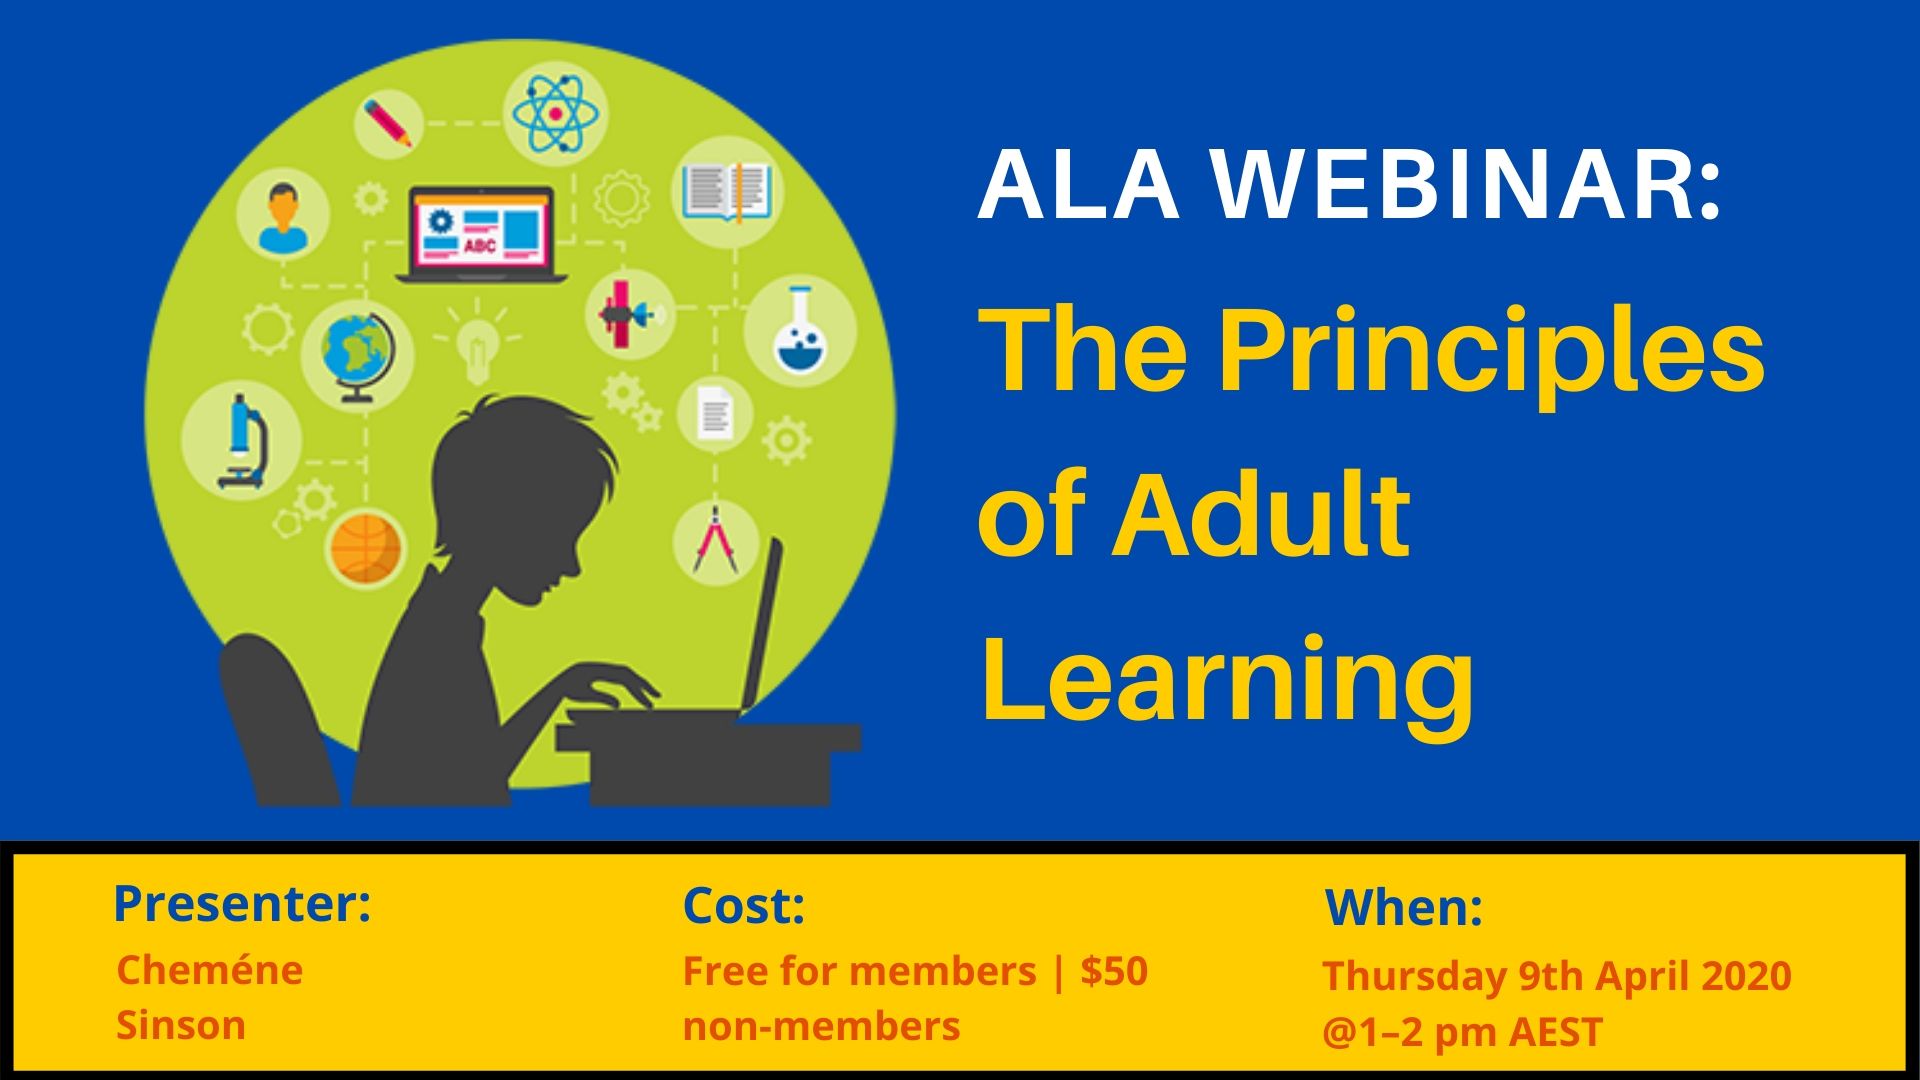 The principles of adult learning